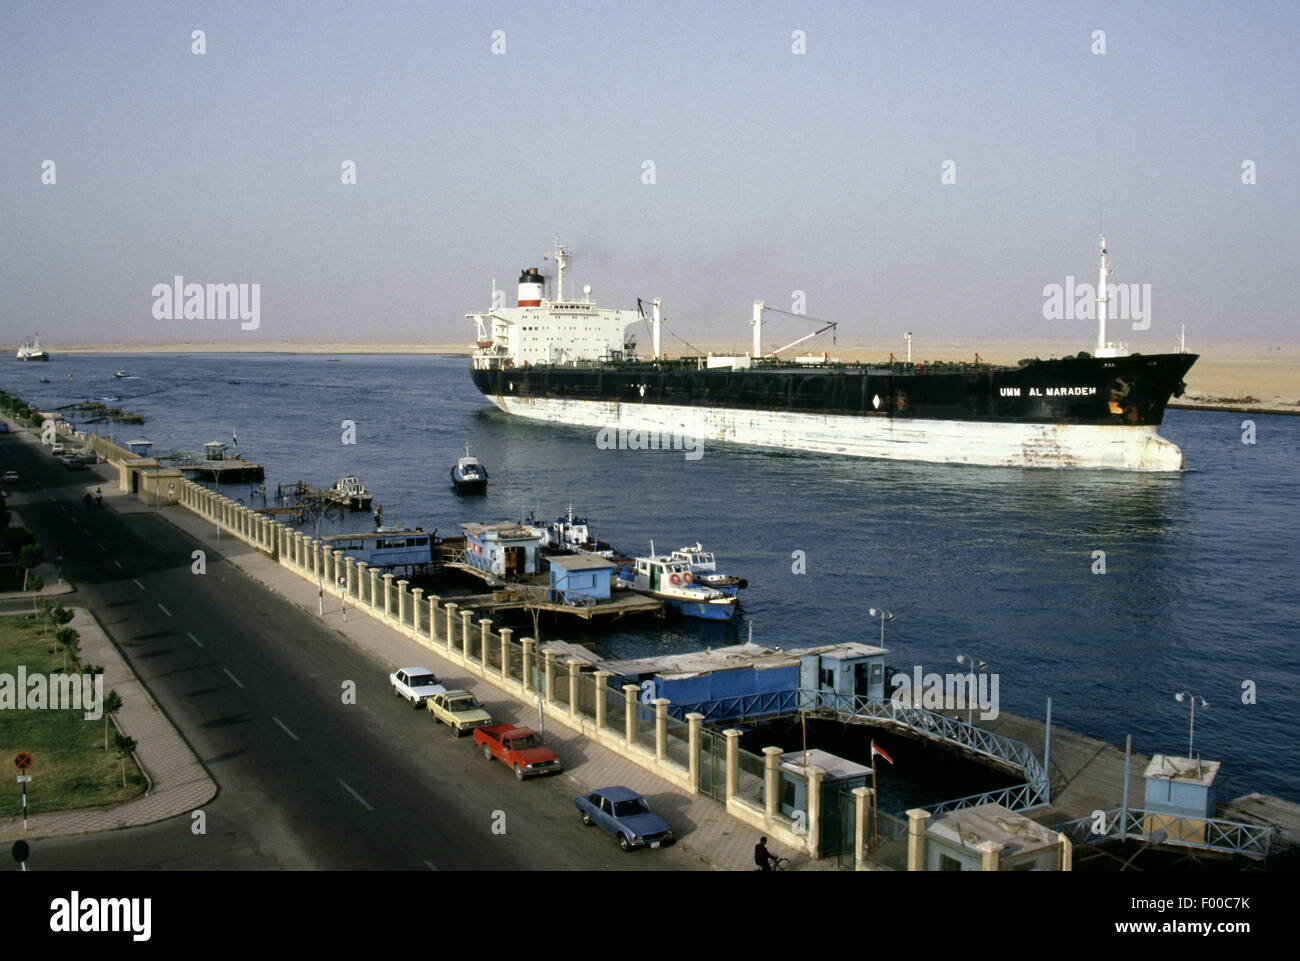 Suez Canal, Egypt - An oil supertanker the Umm Al Maradem nears the southern end of the Suez Canal before the Red Sea Stock Photo